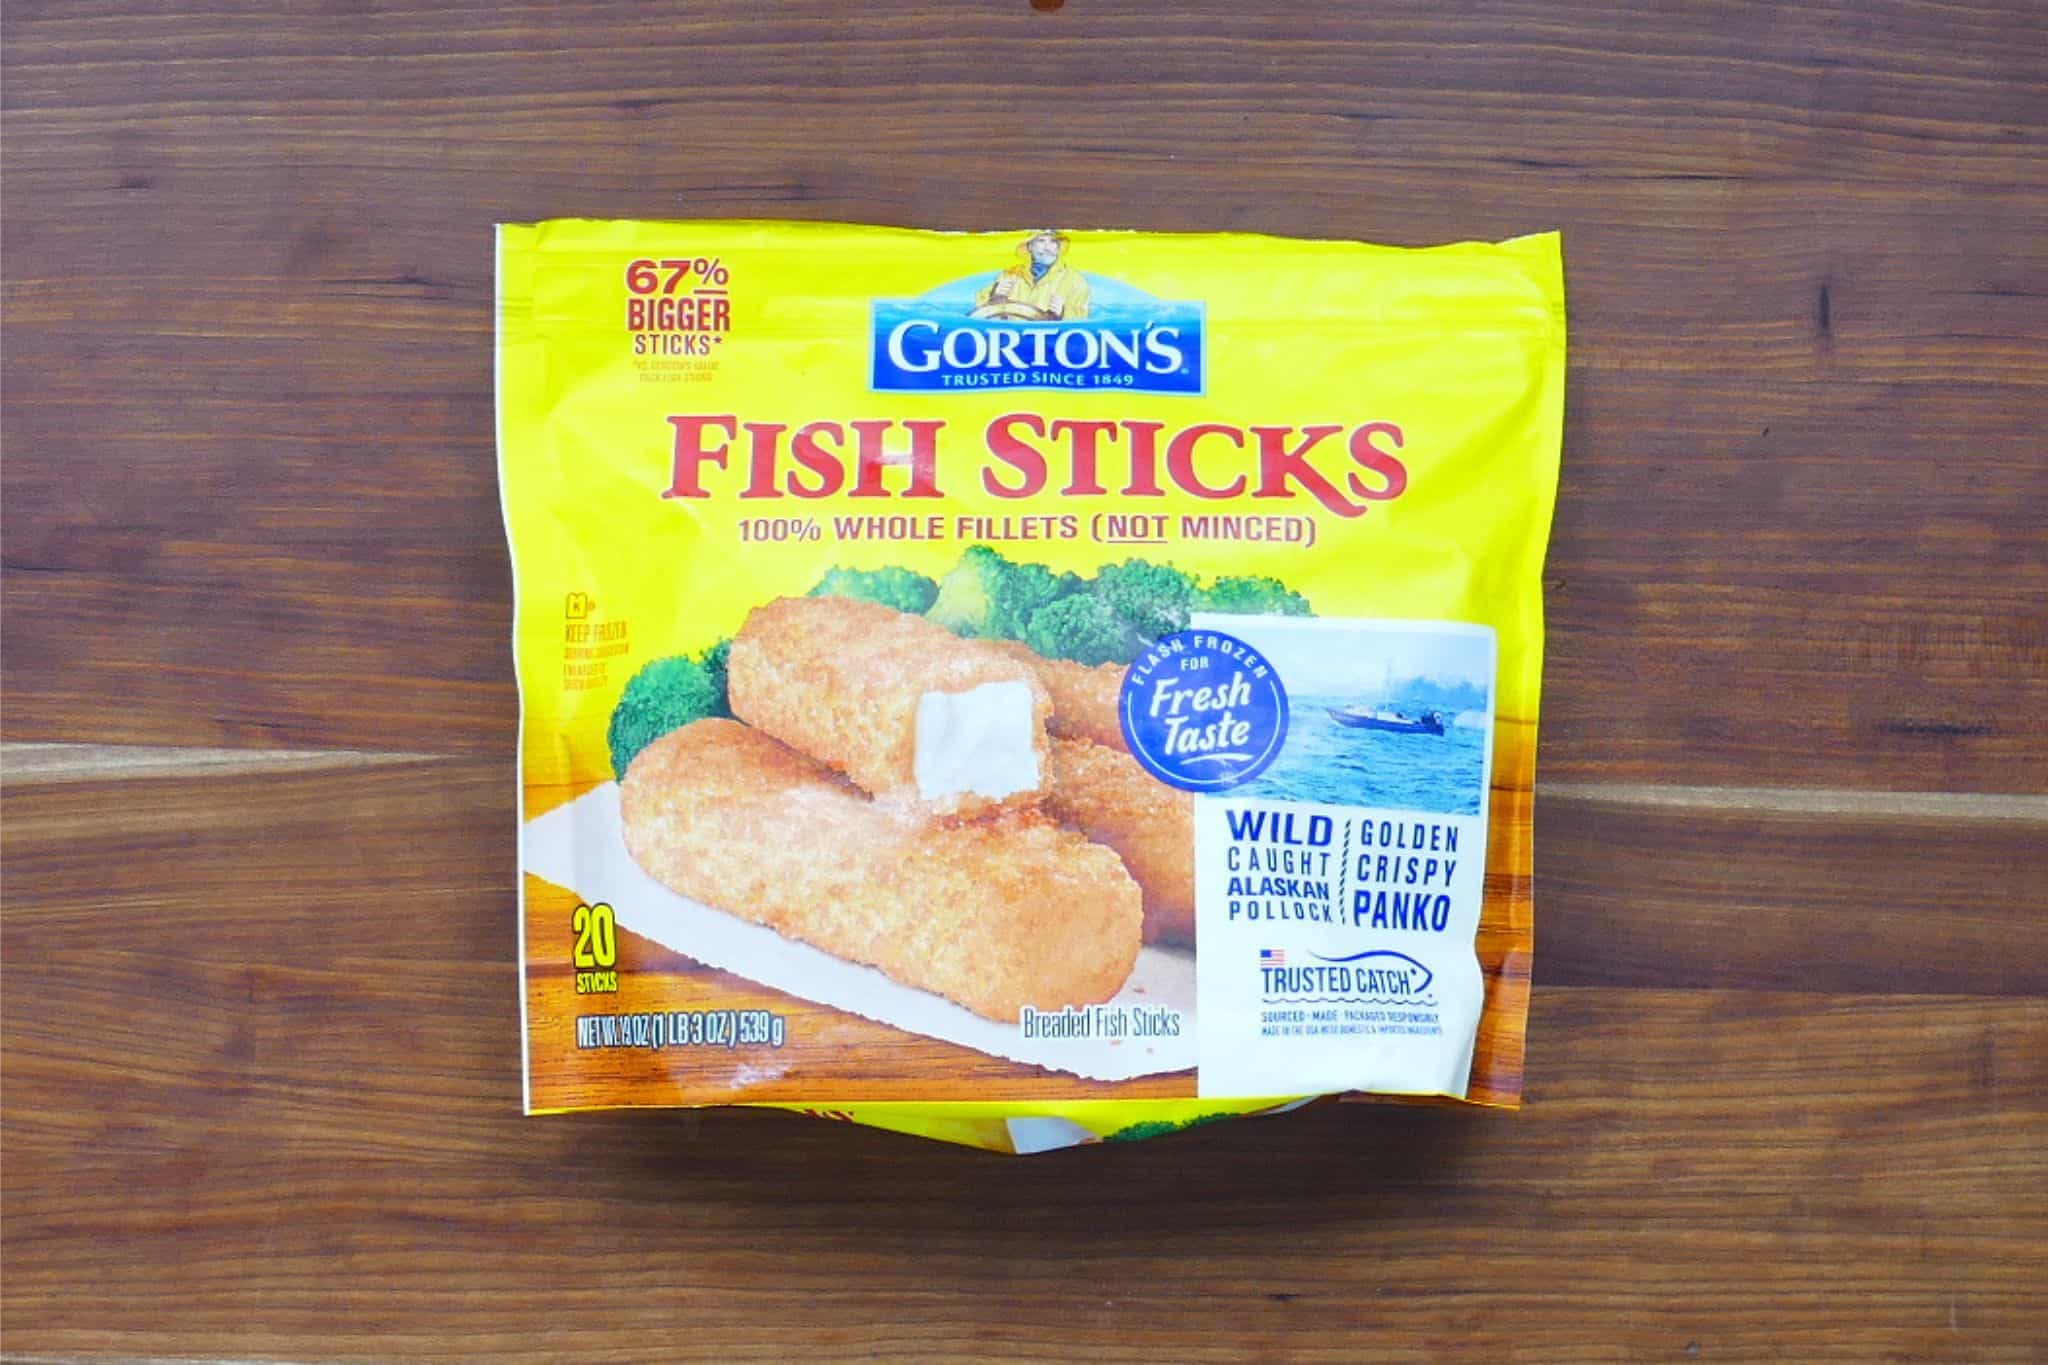 Gorton's fish sticks 100% whole fillets (not minced) in yellow bag